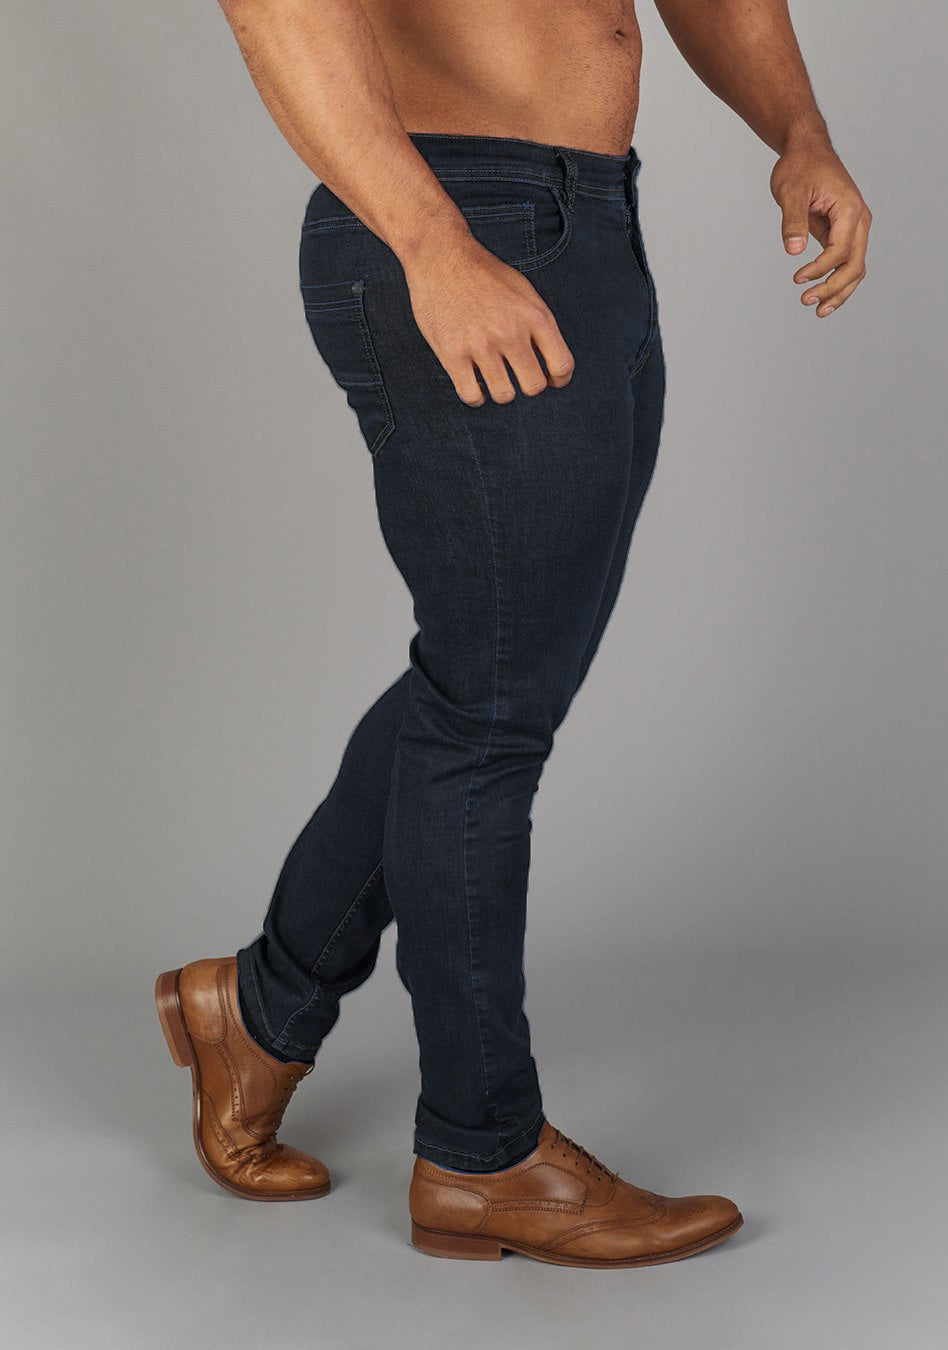 Navy muscle Fit Jeans by Oxcloth, tailored for muscular physiques, offering comfort and flexibility. Perfect combination of style and function for those seeking athletic fit jeans.